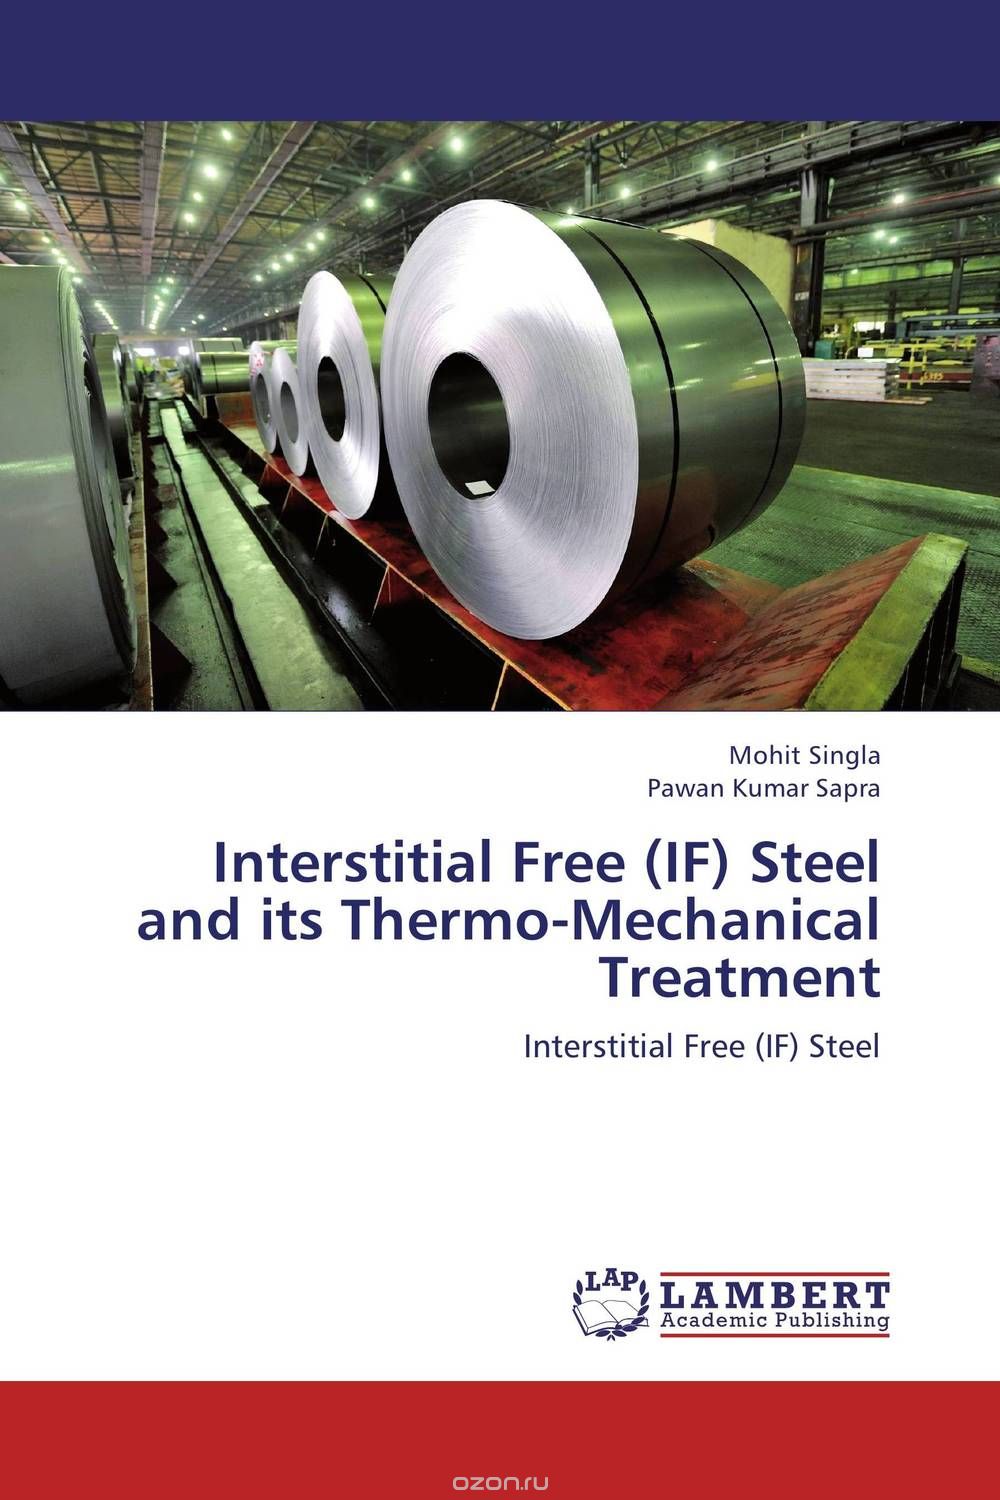 Скачать книгу "Interstitial Free (IF) Steel and its Thermo-Mechanical Treatment"